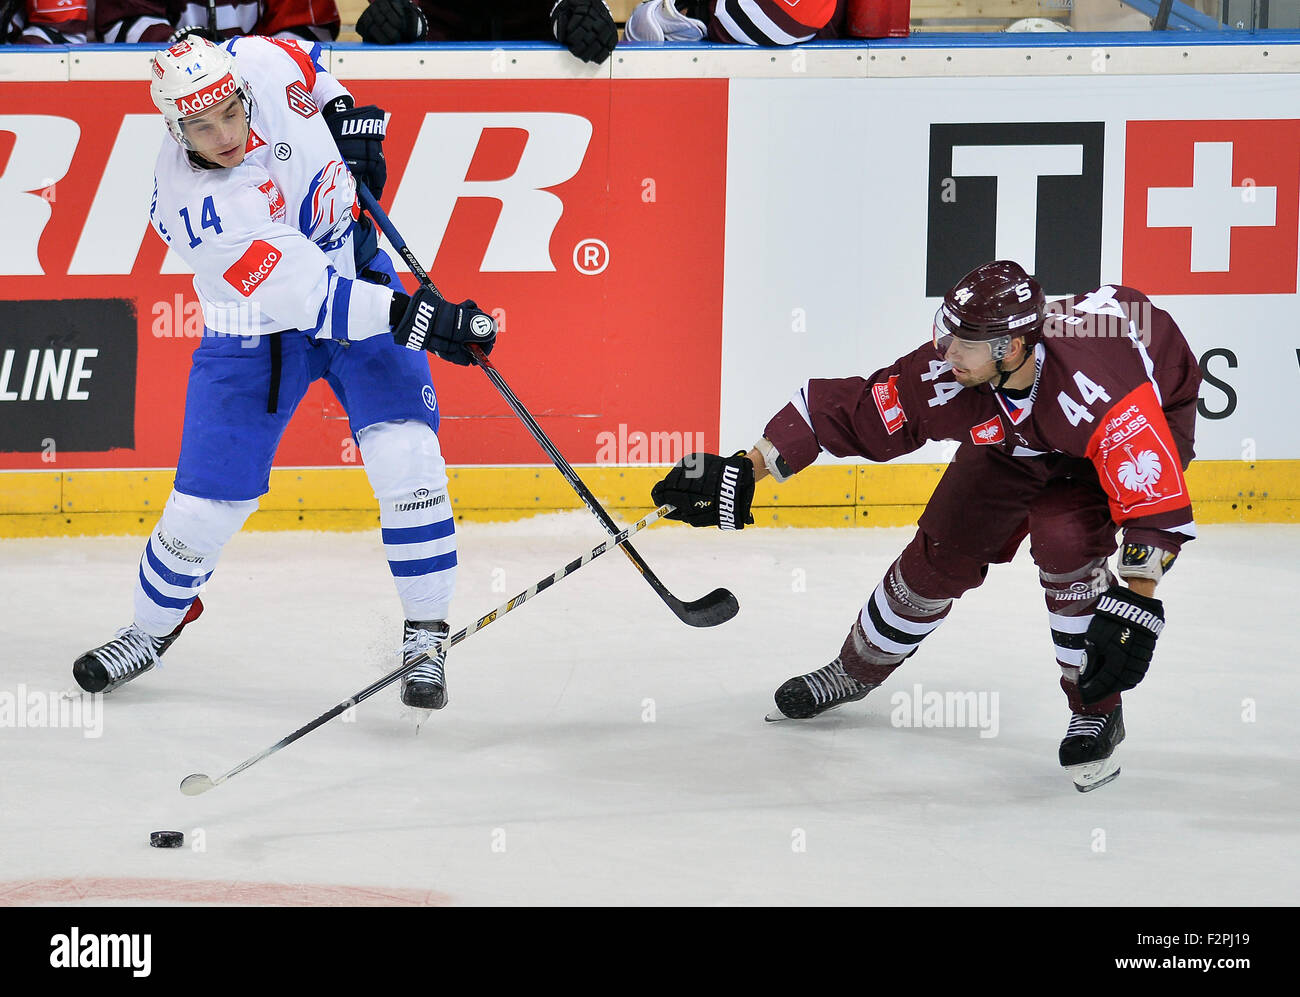 Prague, Czech Republic. 22nd Sep, 2015. From left: Chris Baltisberger of Zurich and Ryan Glenn of Sparta during the ice hockey Champions League, 1st round play off match HC Sparta Praha vs ZSC Zurich Lions in Prague, Czech Republic, September 22, 2015. © Katerina Sulova/CTK Photo/Alamy Live News Stock Photo